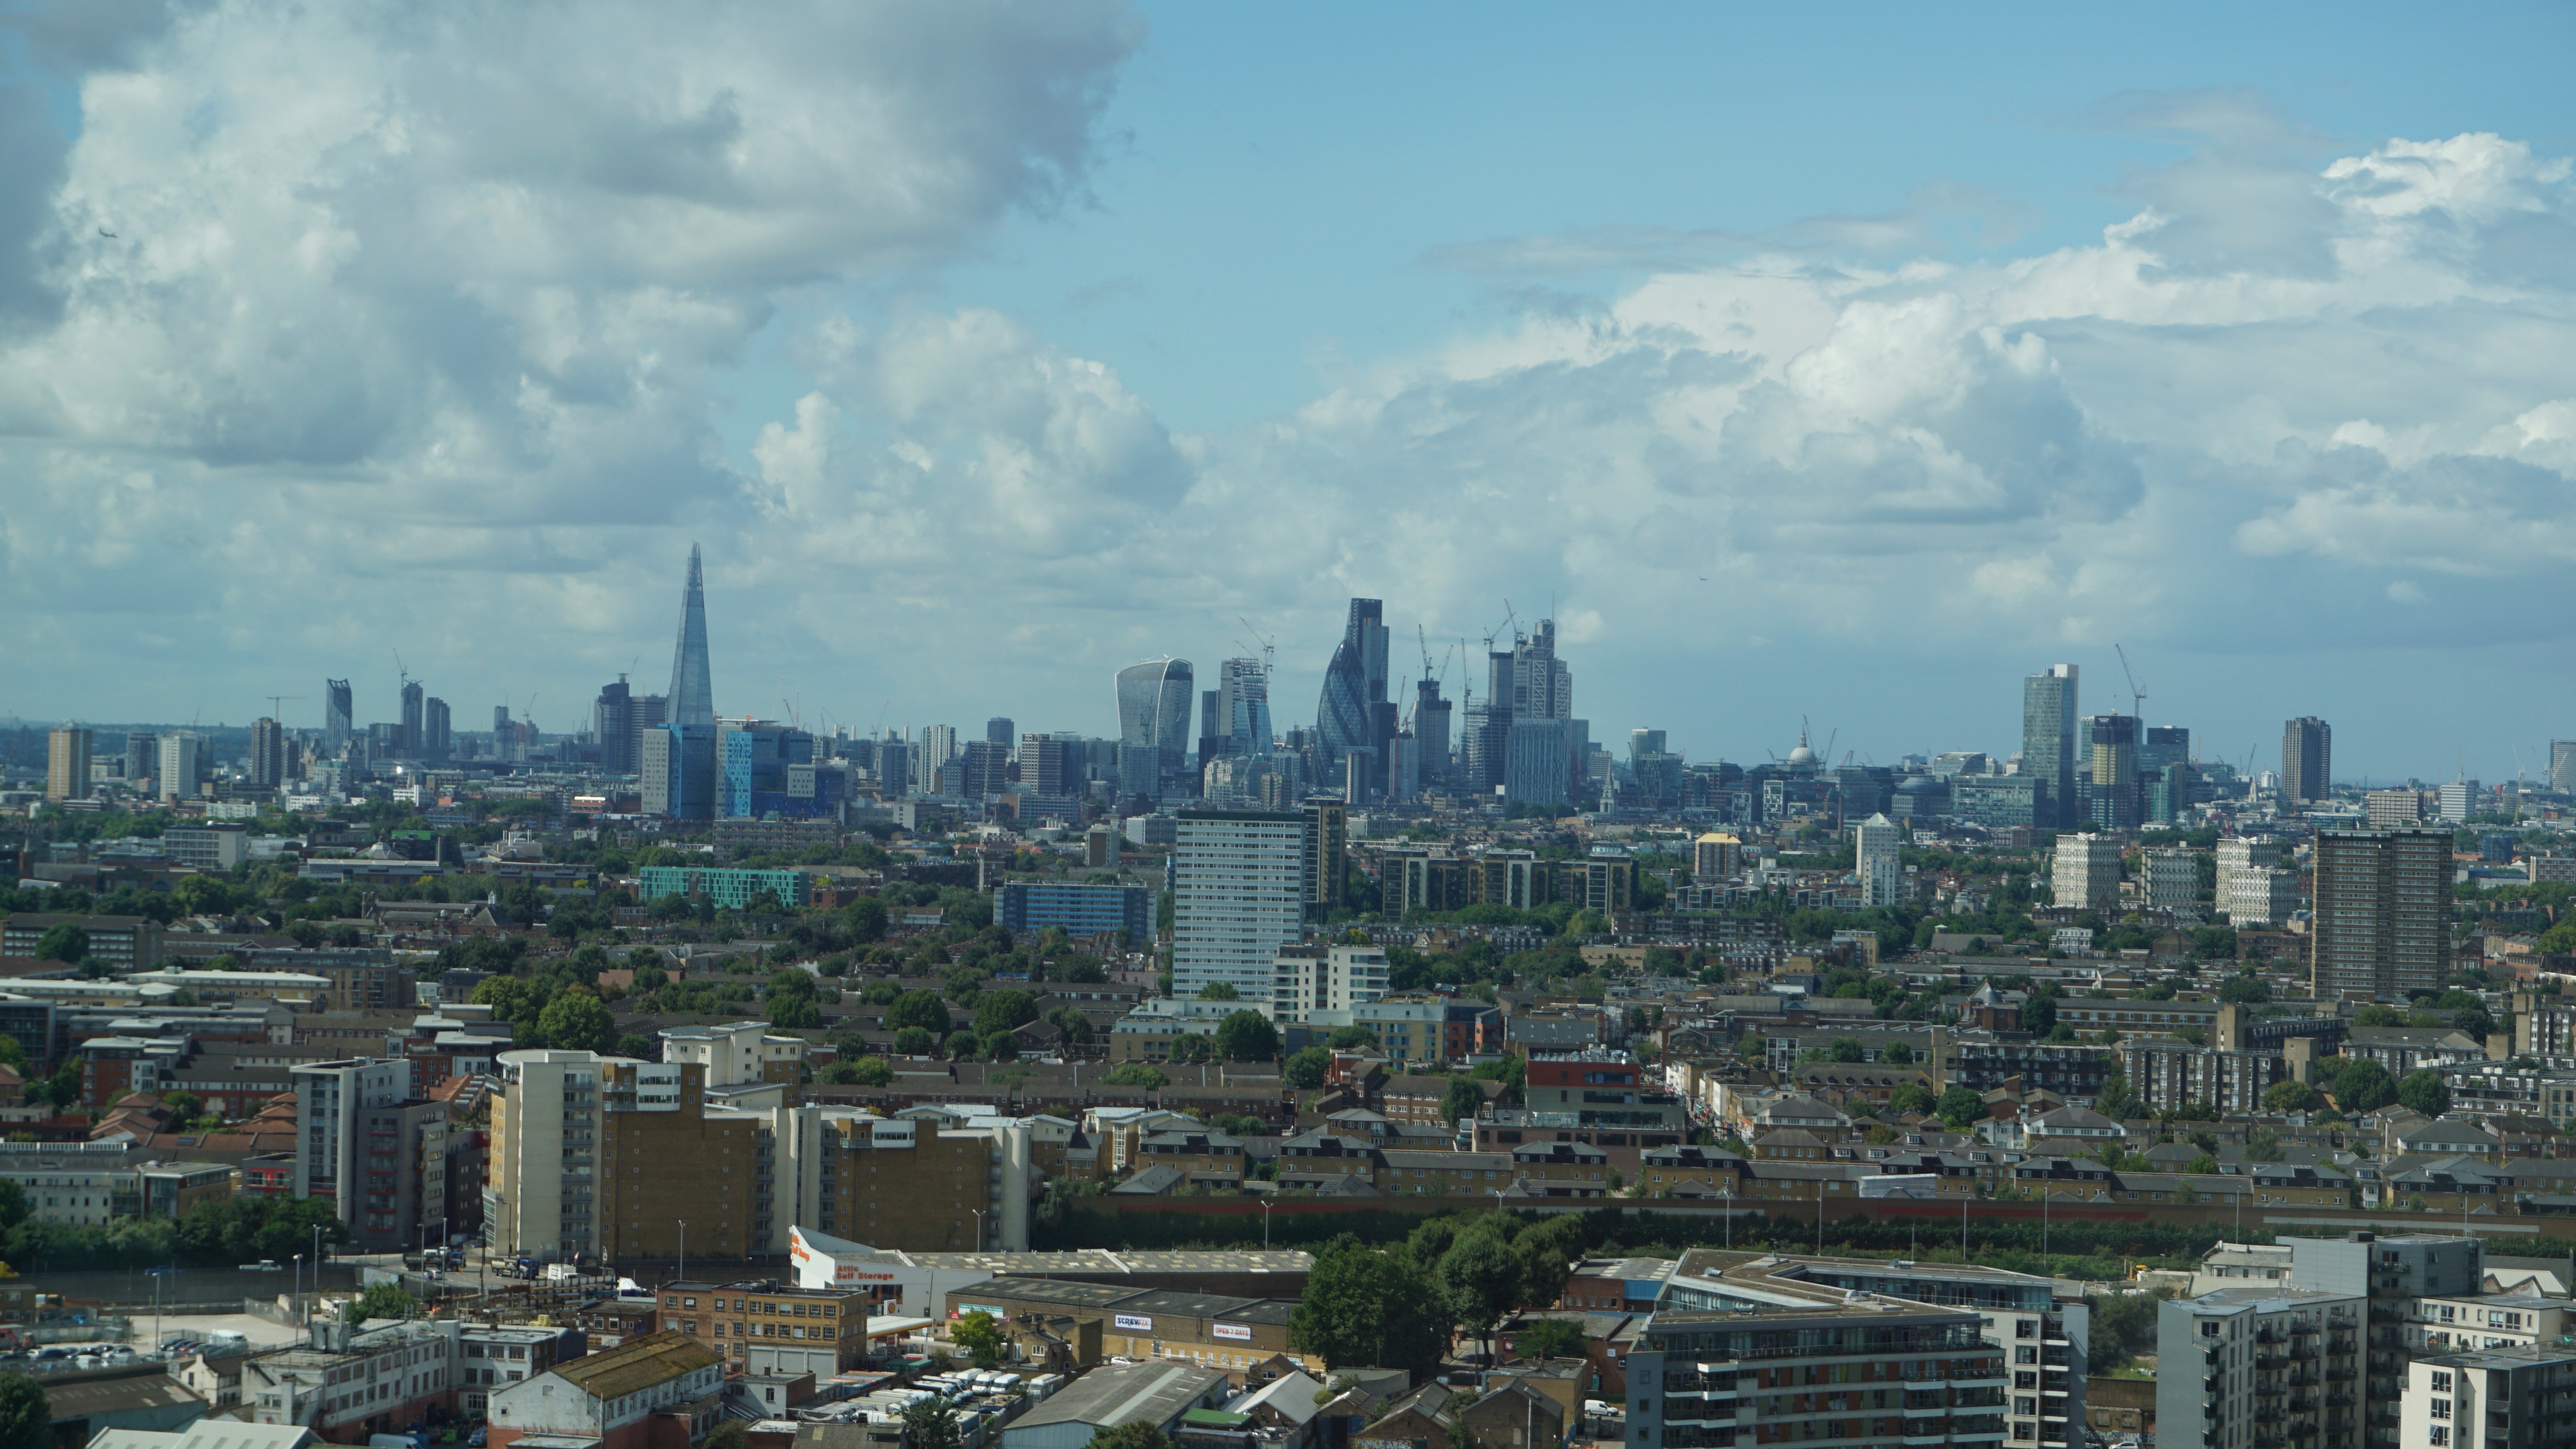 View from ArcelorMittal Orbit